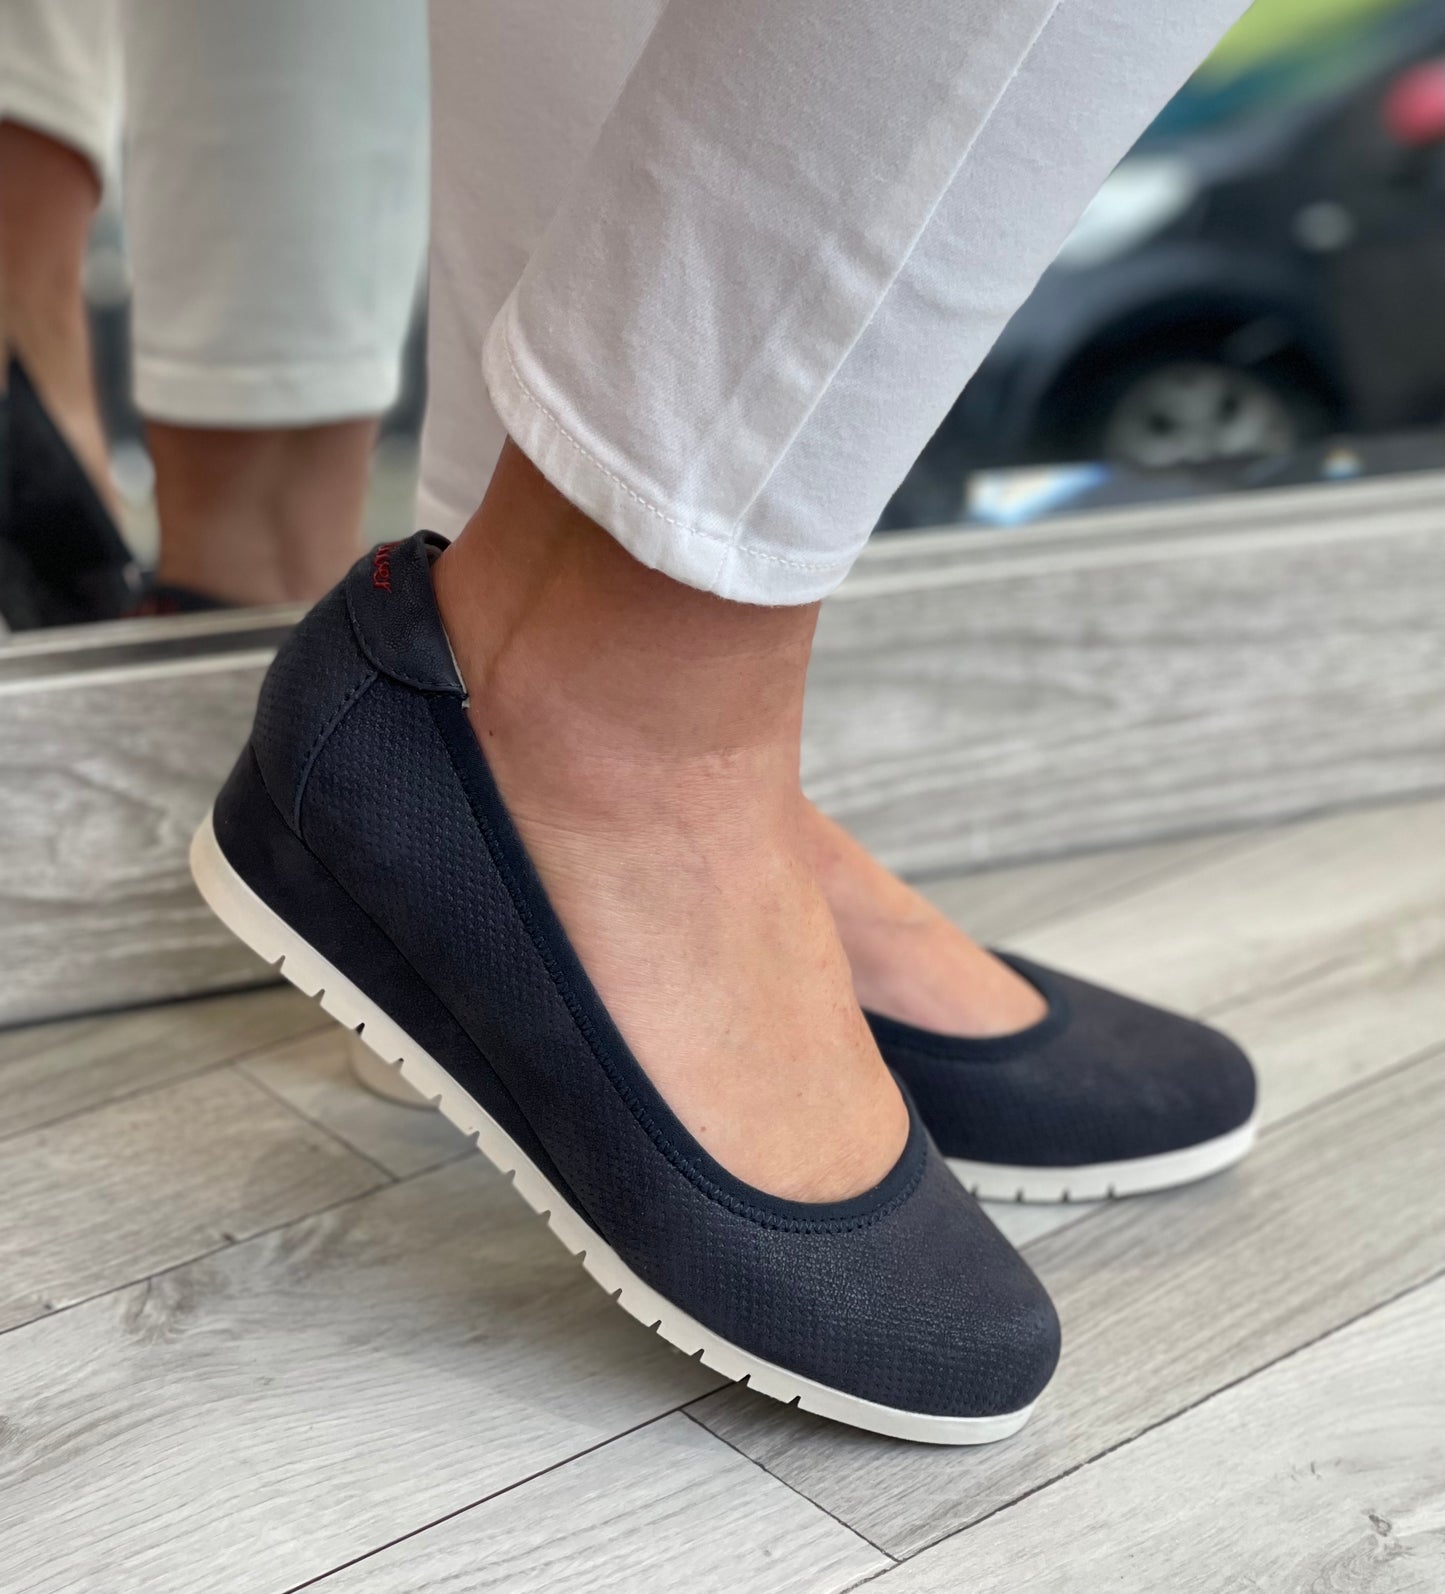 S Oliver - Navy Casual Wedge Shoe